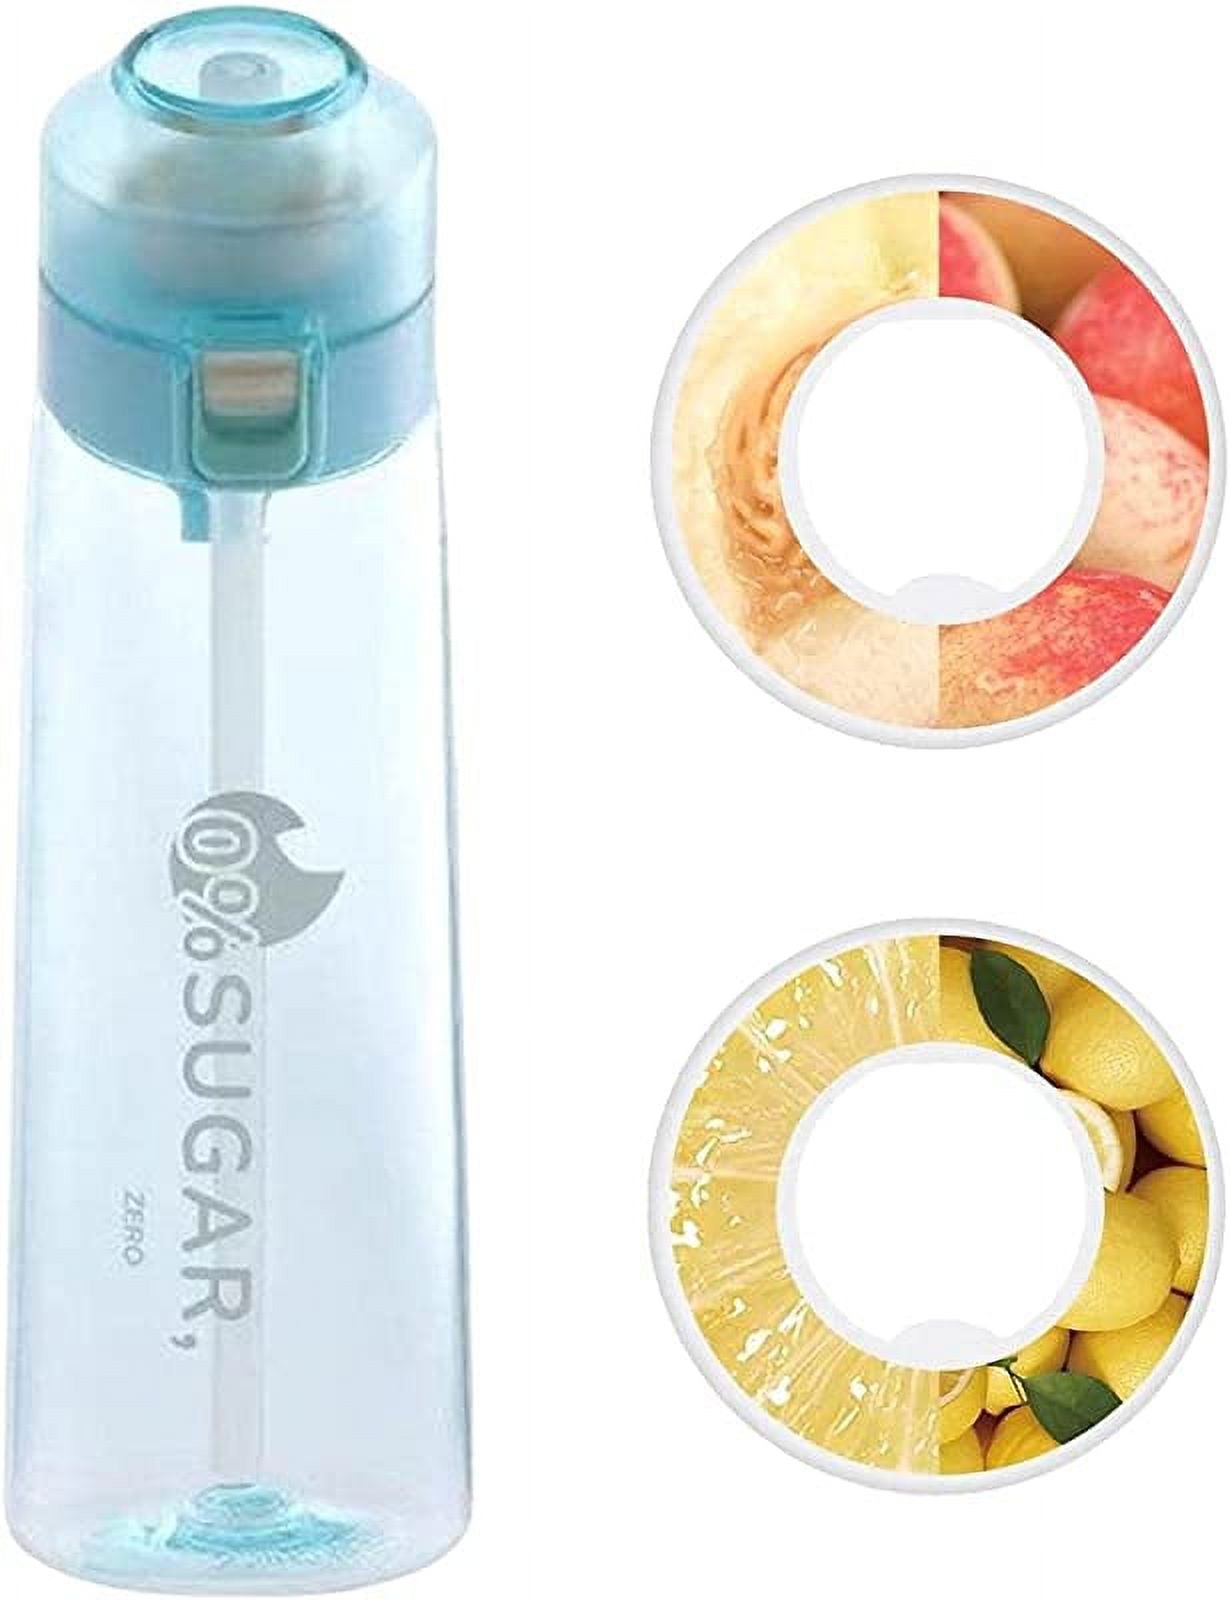 Dropship Fruit Fragrance Water Bottle, Scent Water Cup, Flavor